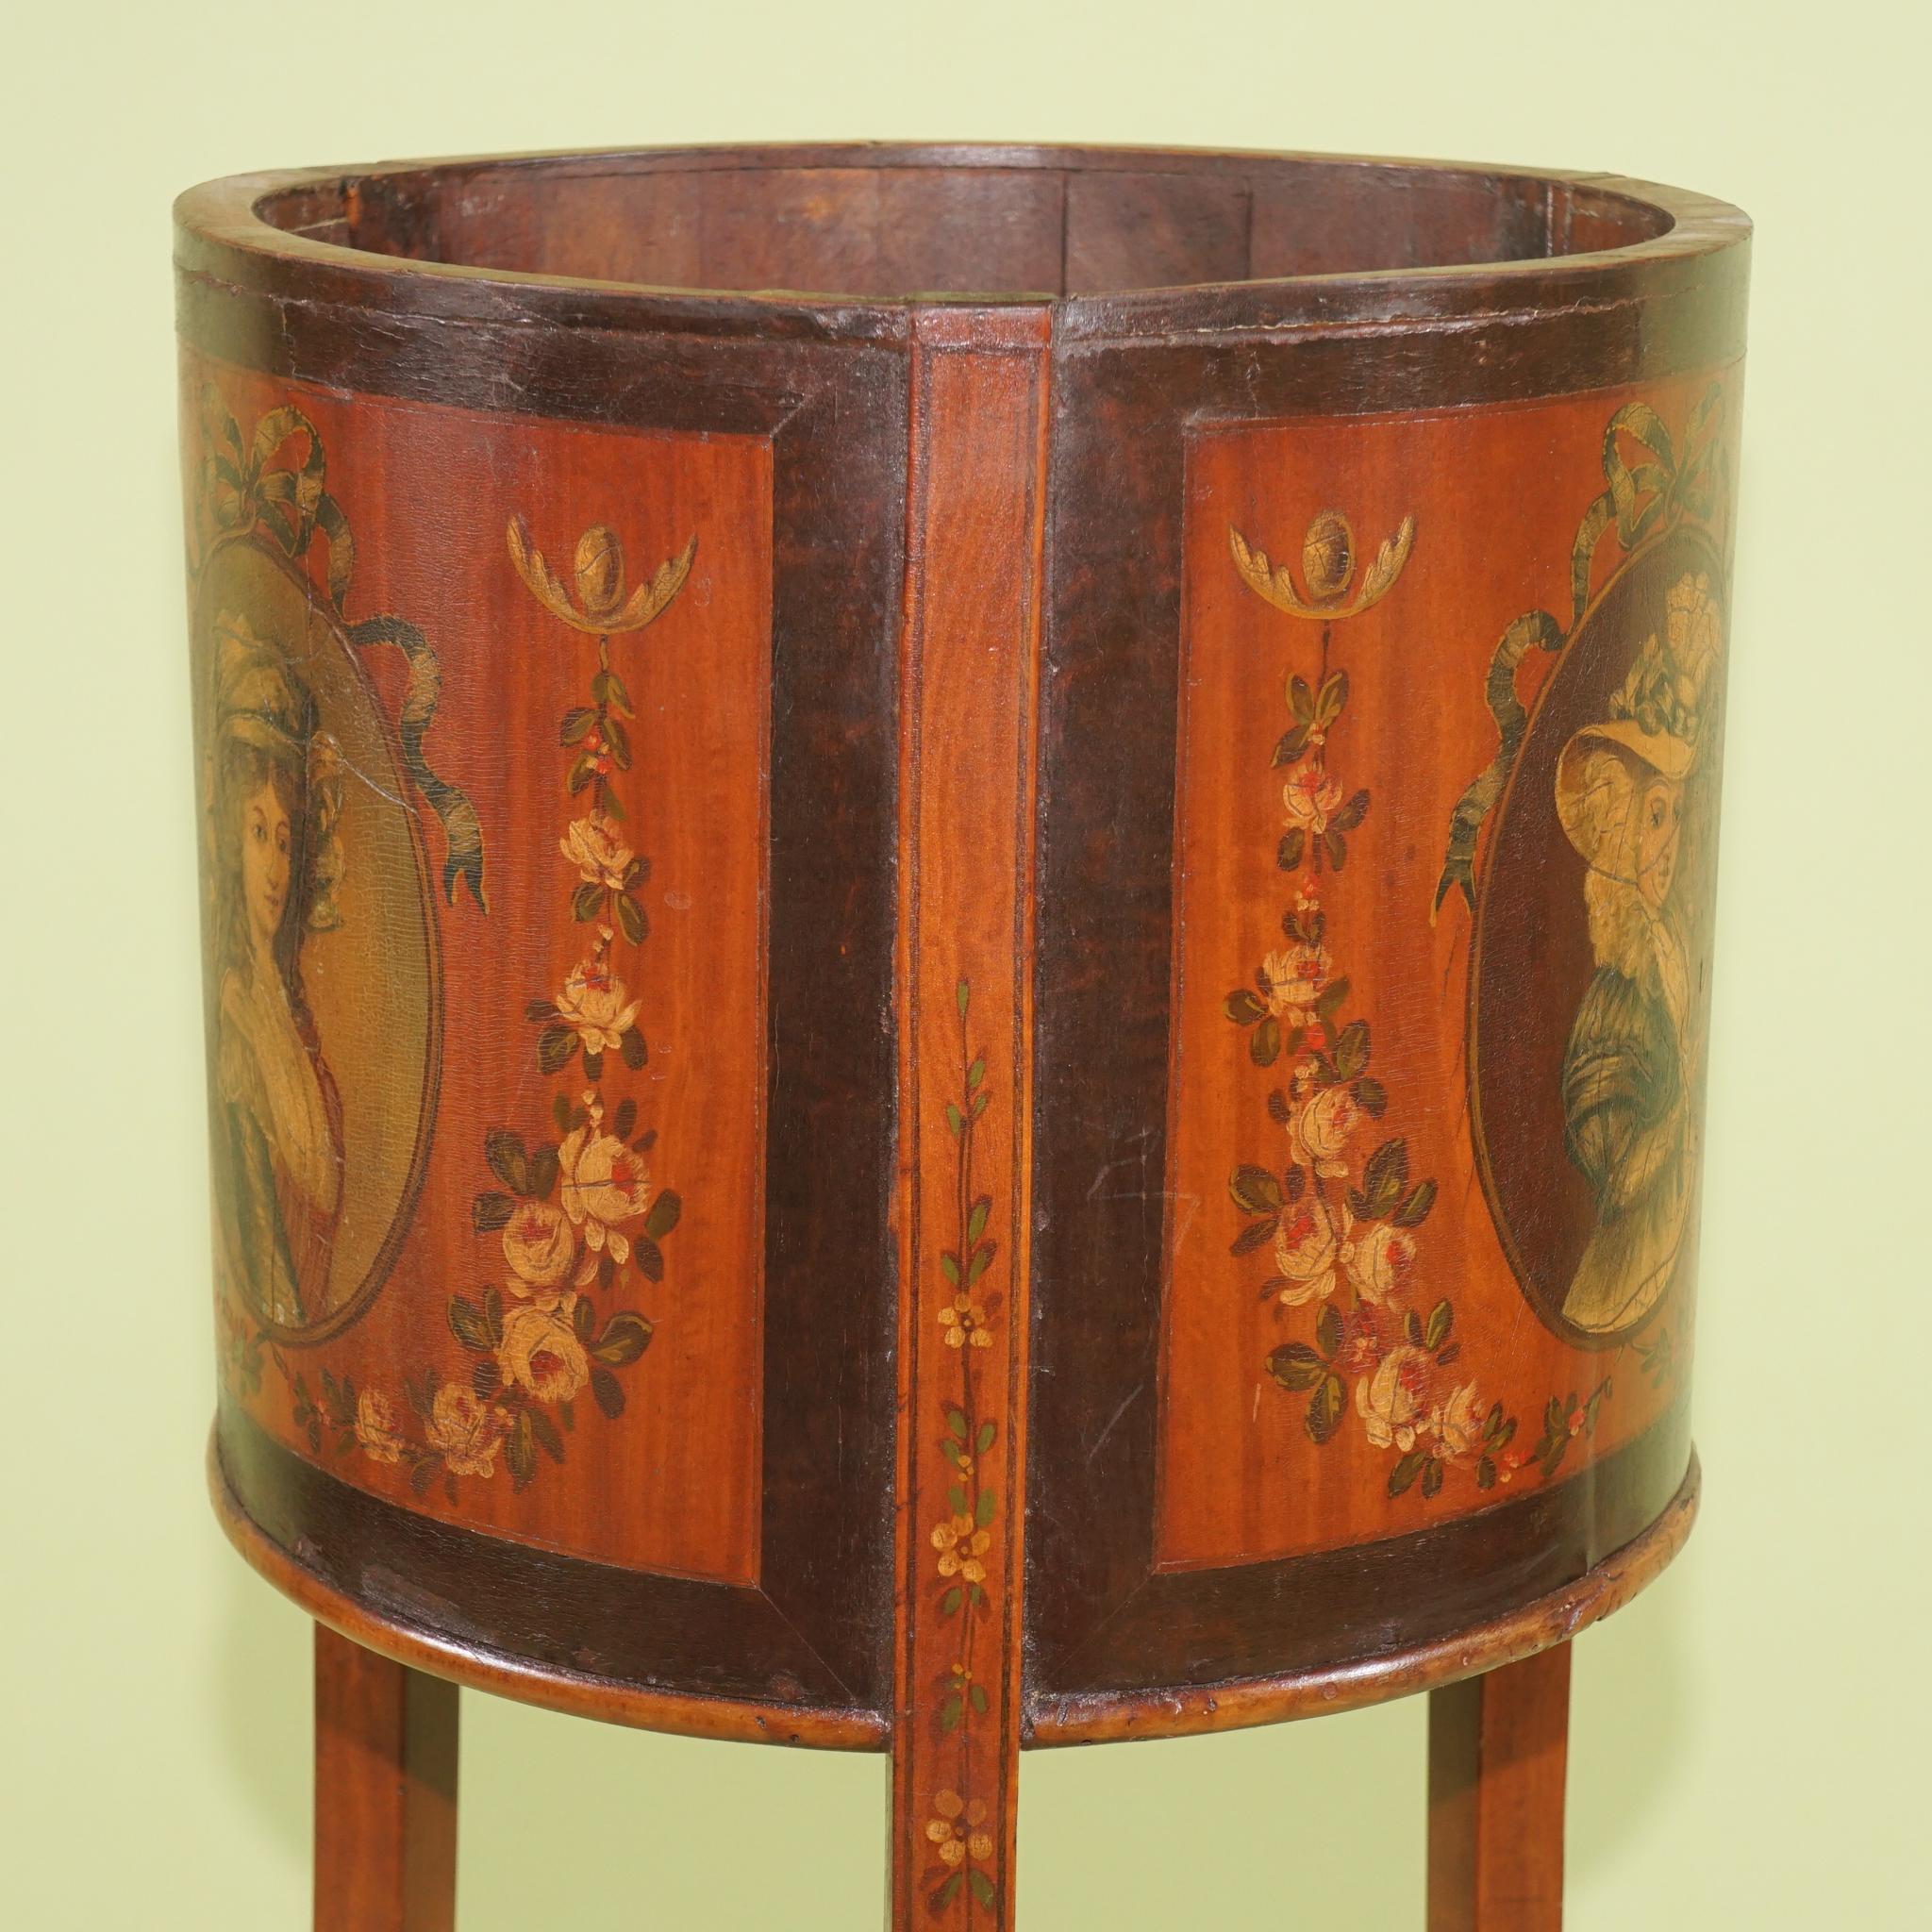 Early 20th Century Fine Edwardian Satinwood and Mahogany Paint Decorated Planter For Sale